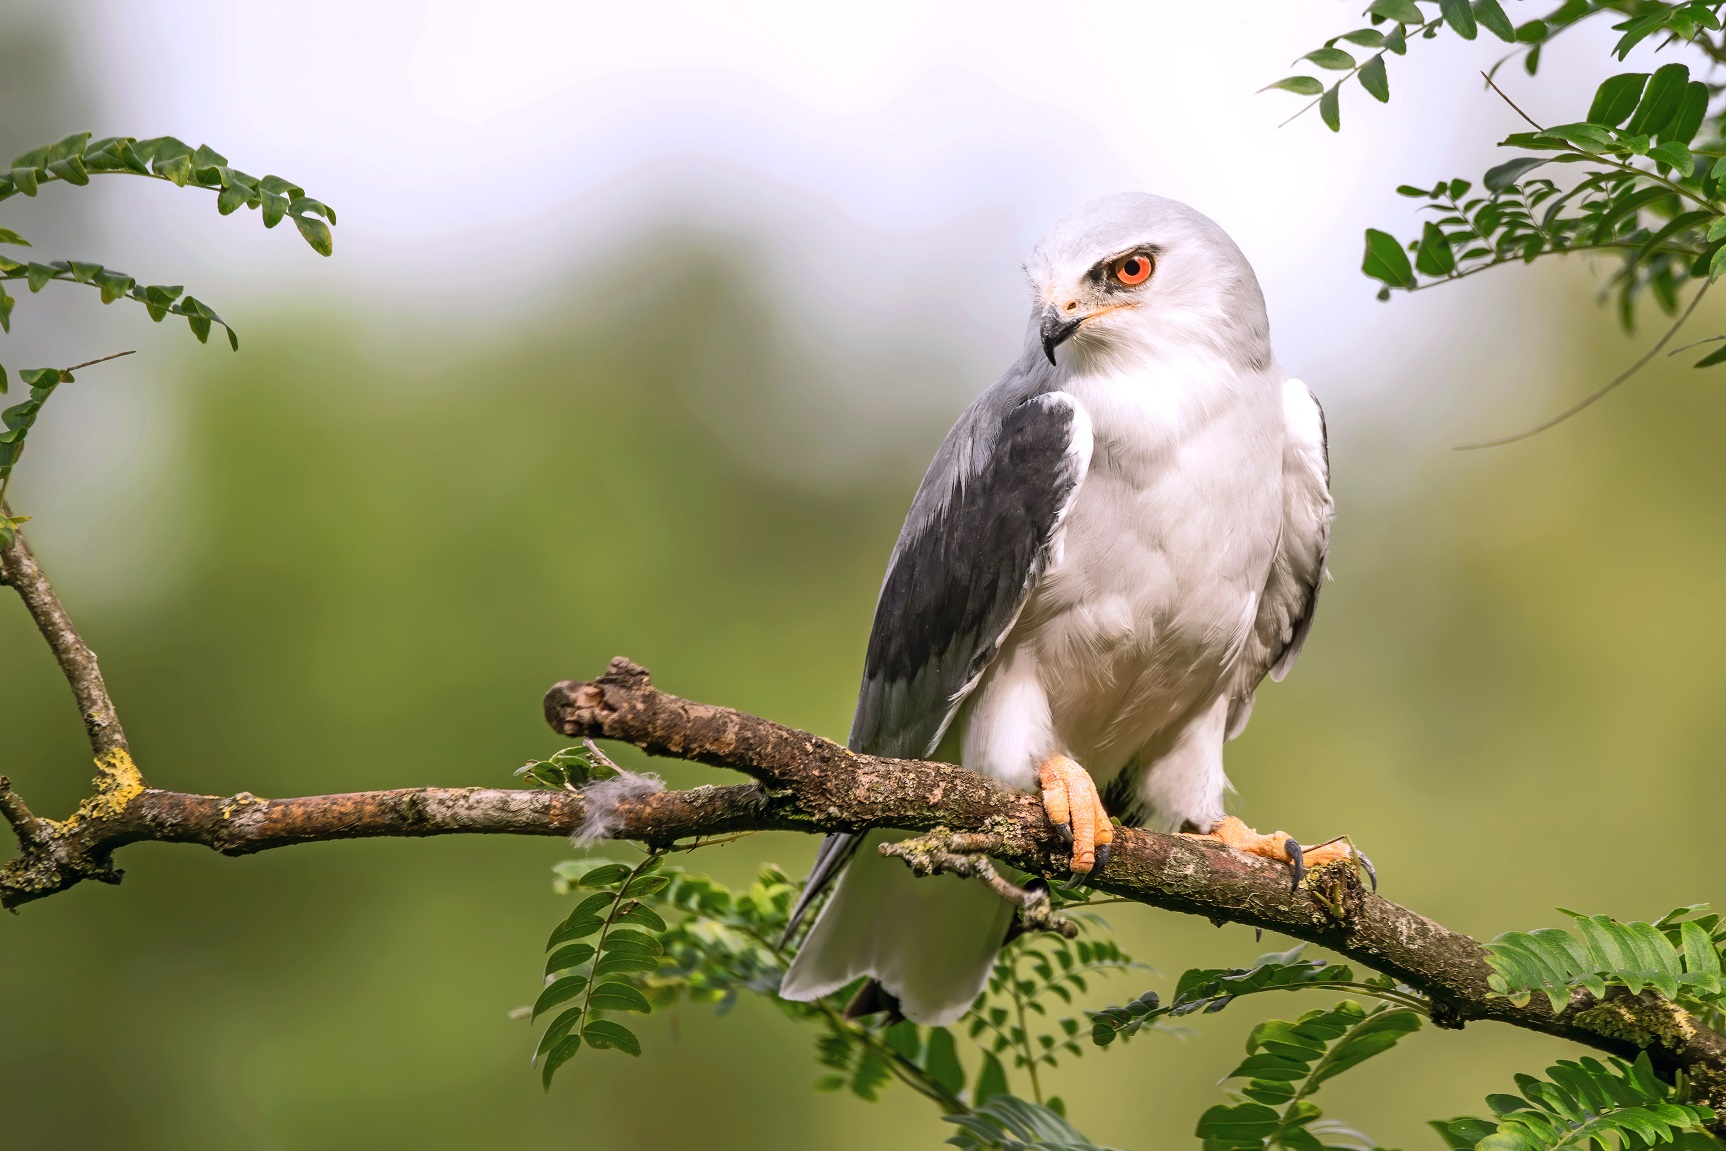 Black-Winged Kite is one of the species identified during Raptor Watch  2021. Find other species in this year's Raptor Watch.